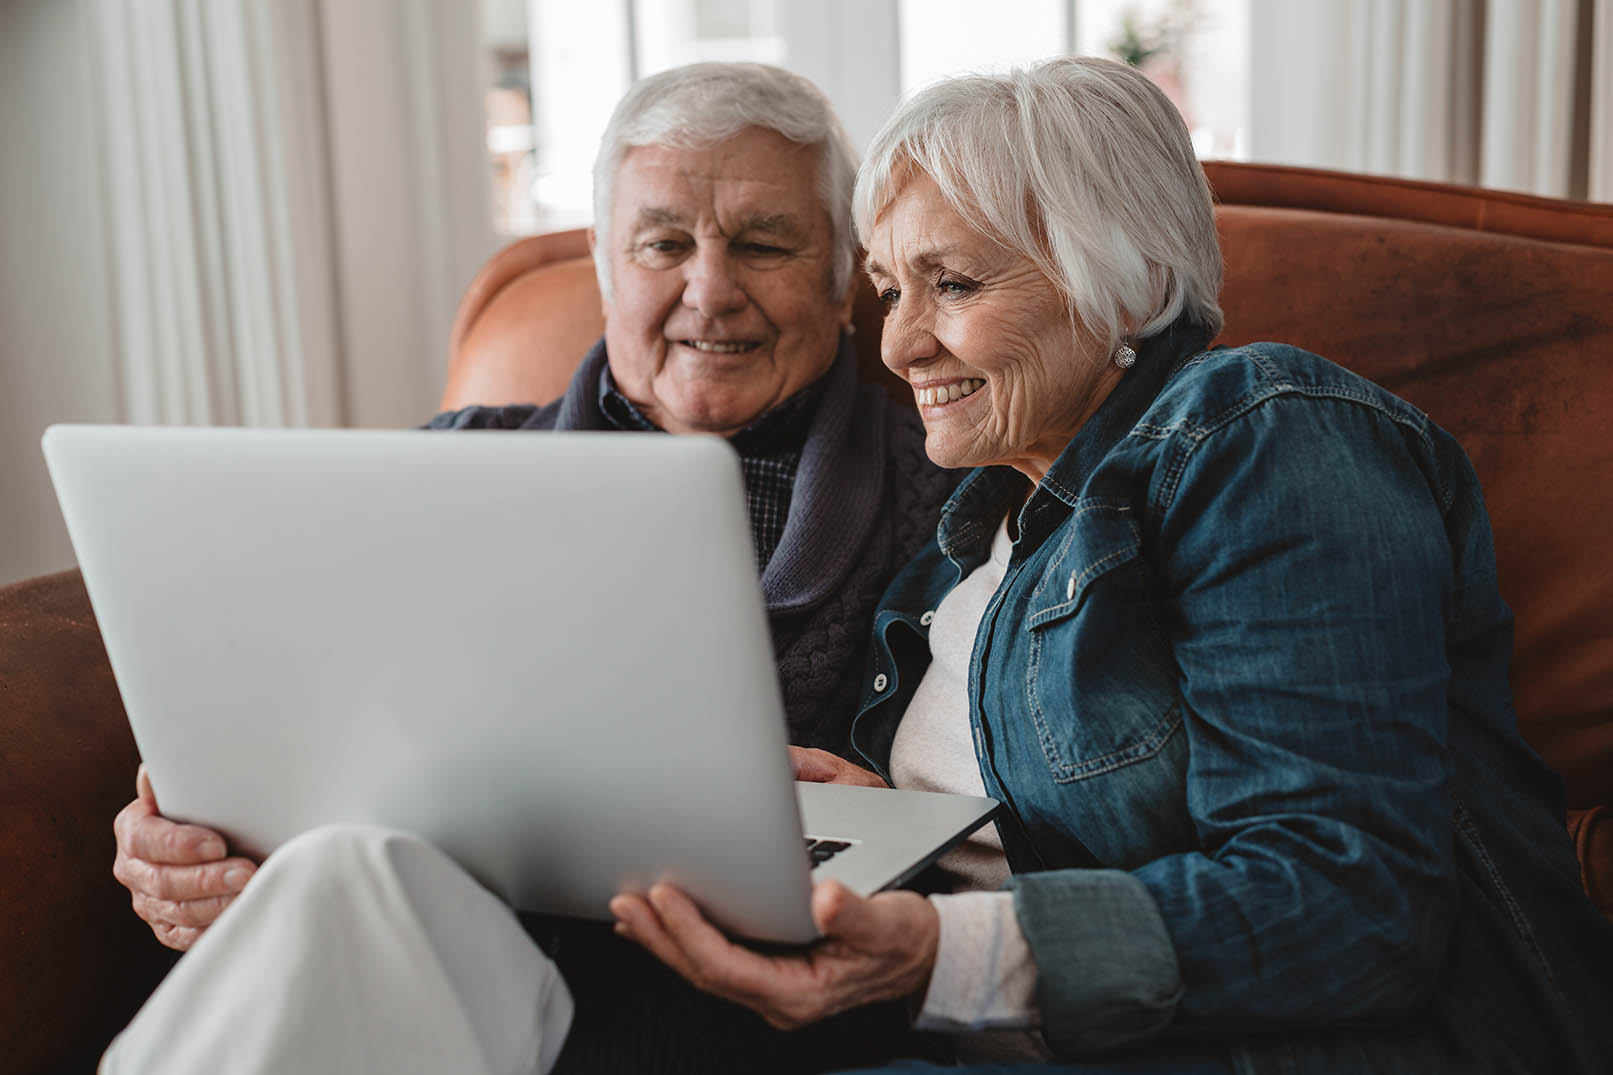 Smiling senior couple using a laptop on their sofa to find Memory Care options